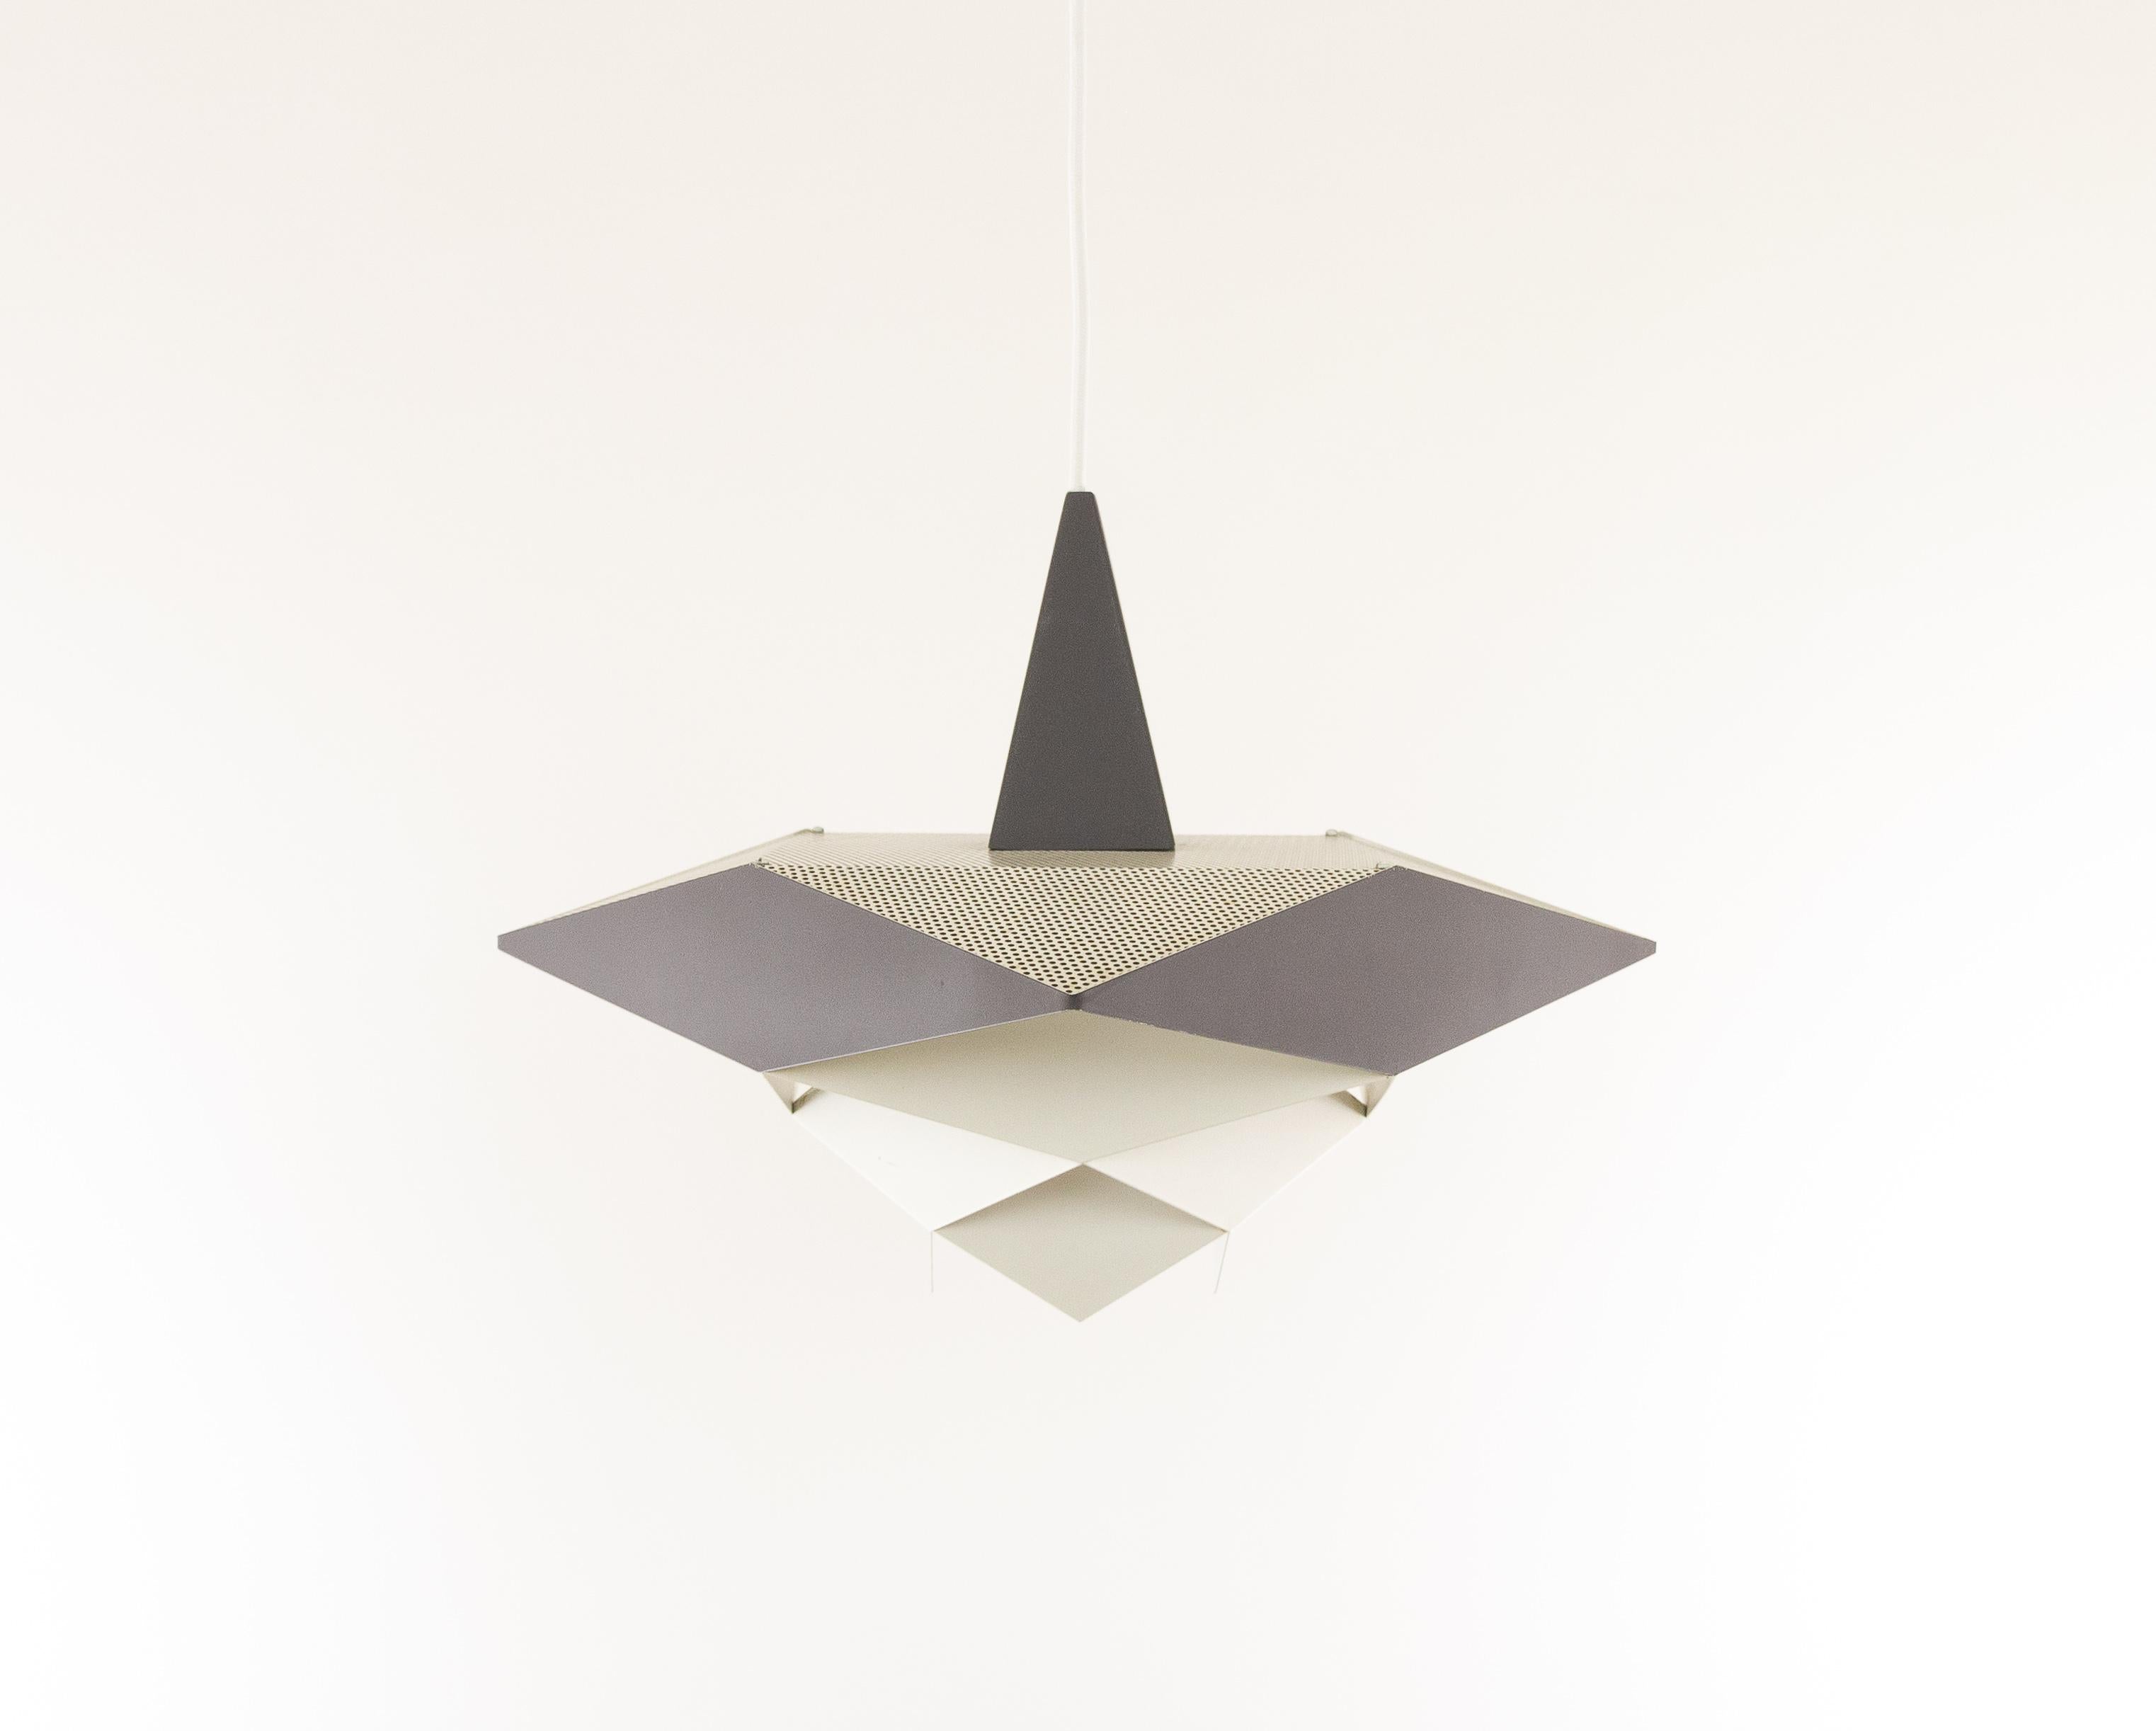 Danish mid century pendant designed by Preben Dahl in the early 1960s and produced by Hans Følsgaard Belysning.

The model is part of the Symfoni lighting series, consisting of ceiling lights and pendants made of white and grey-lacquered metal in